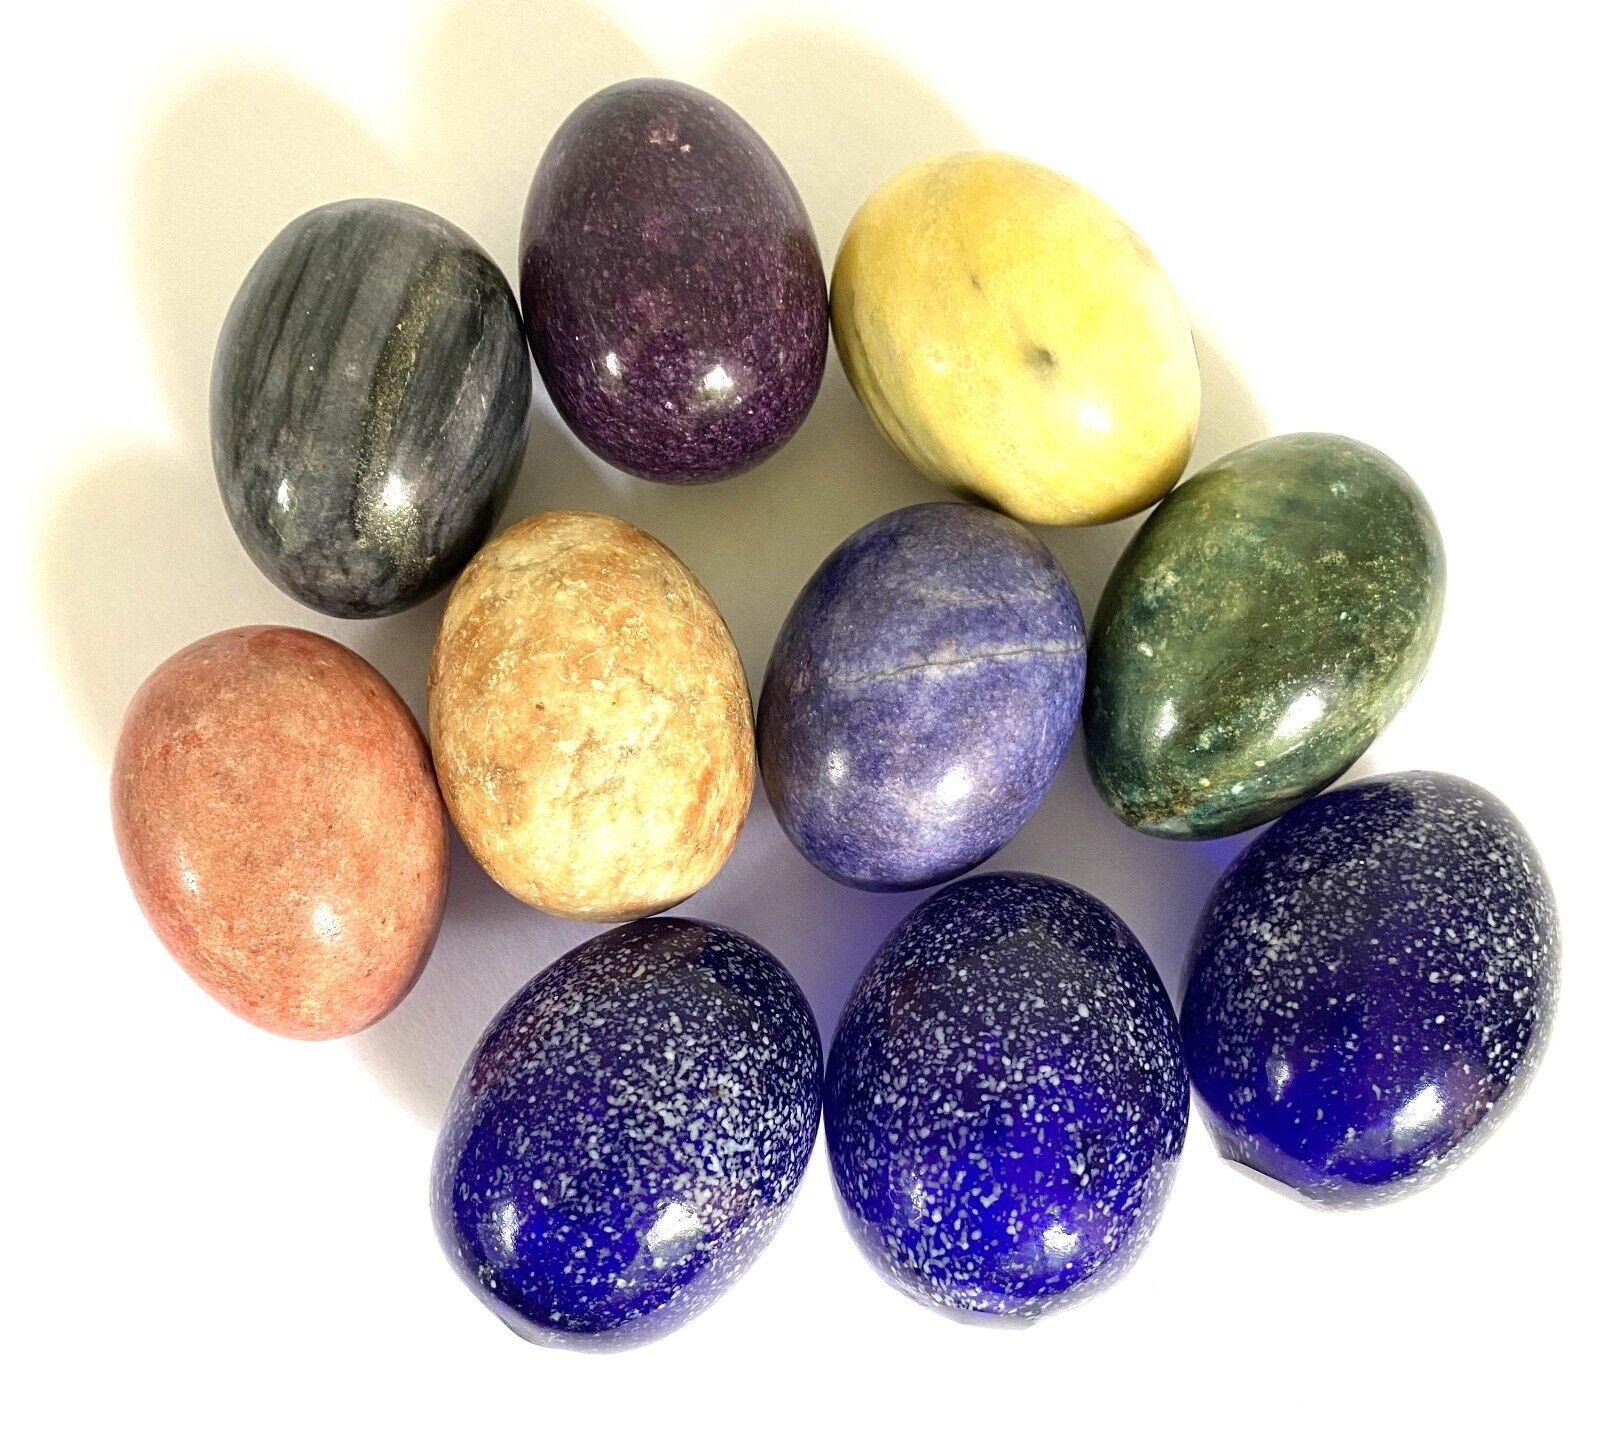 Lot of 10 Vintage Stone and Glass Eggs Décor Variety of Colors 2.5”